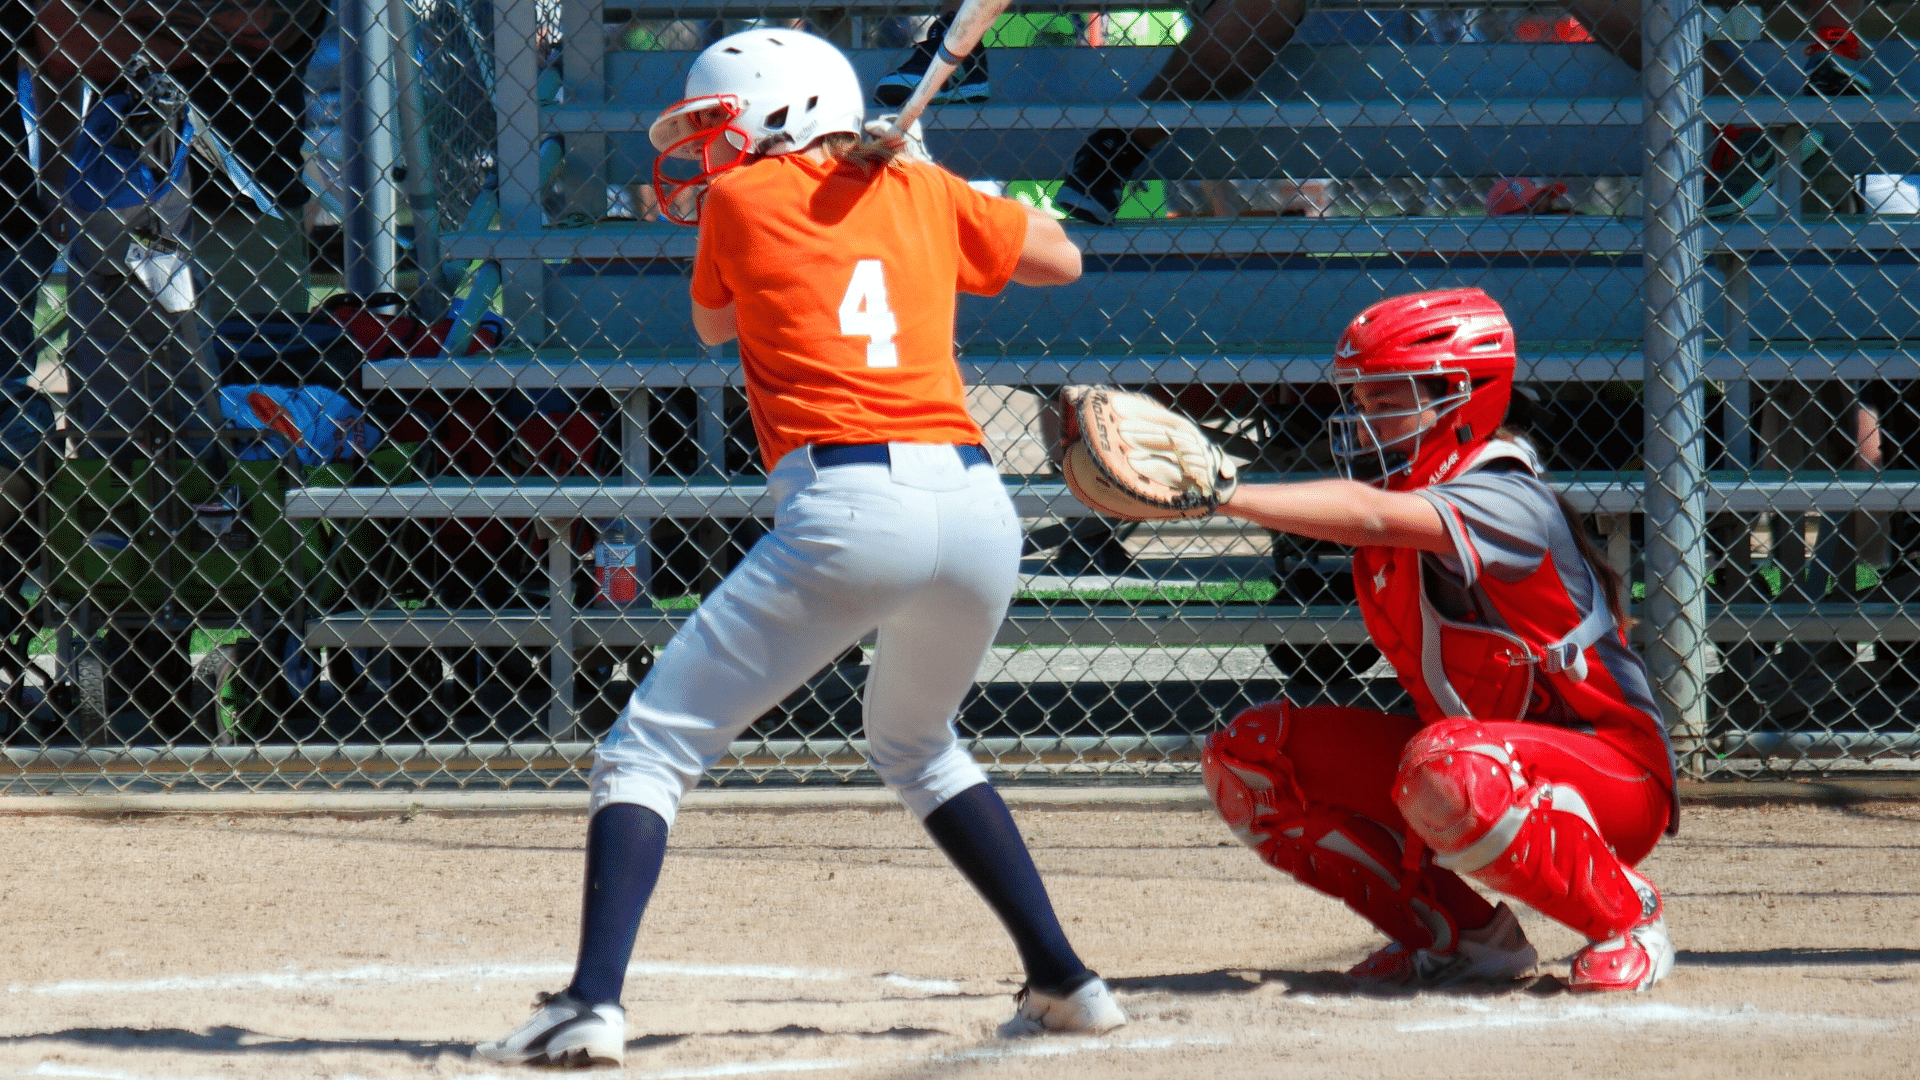 softball batter at home plate with catcher